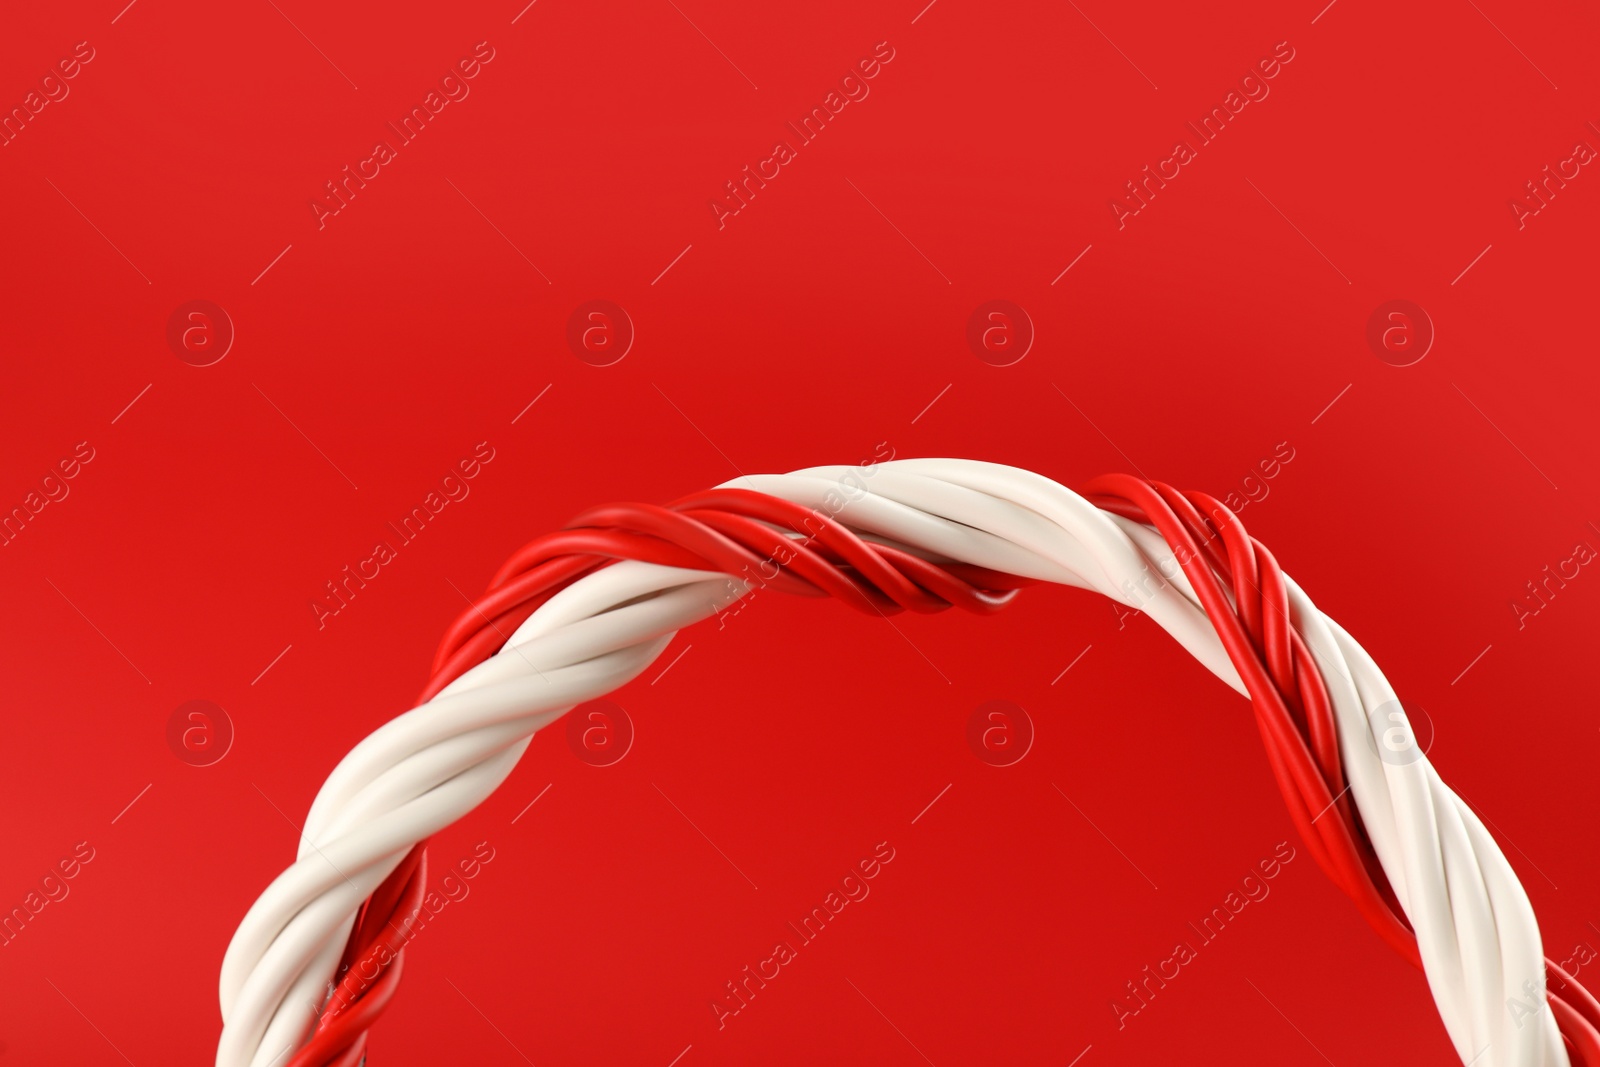 Photo of Electric wires on red background, closeup view